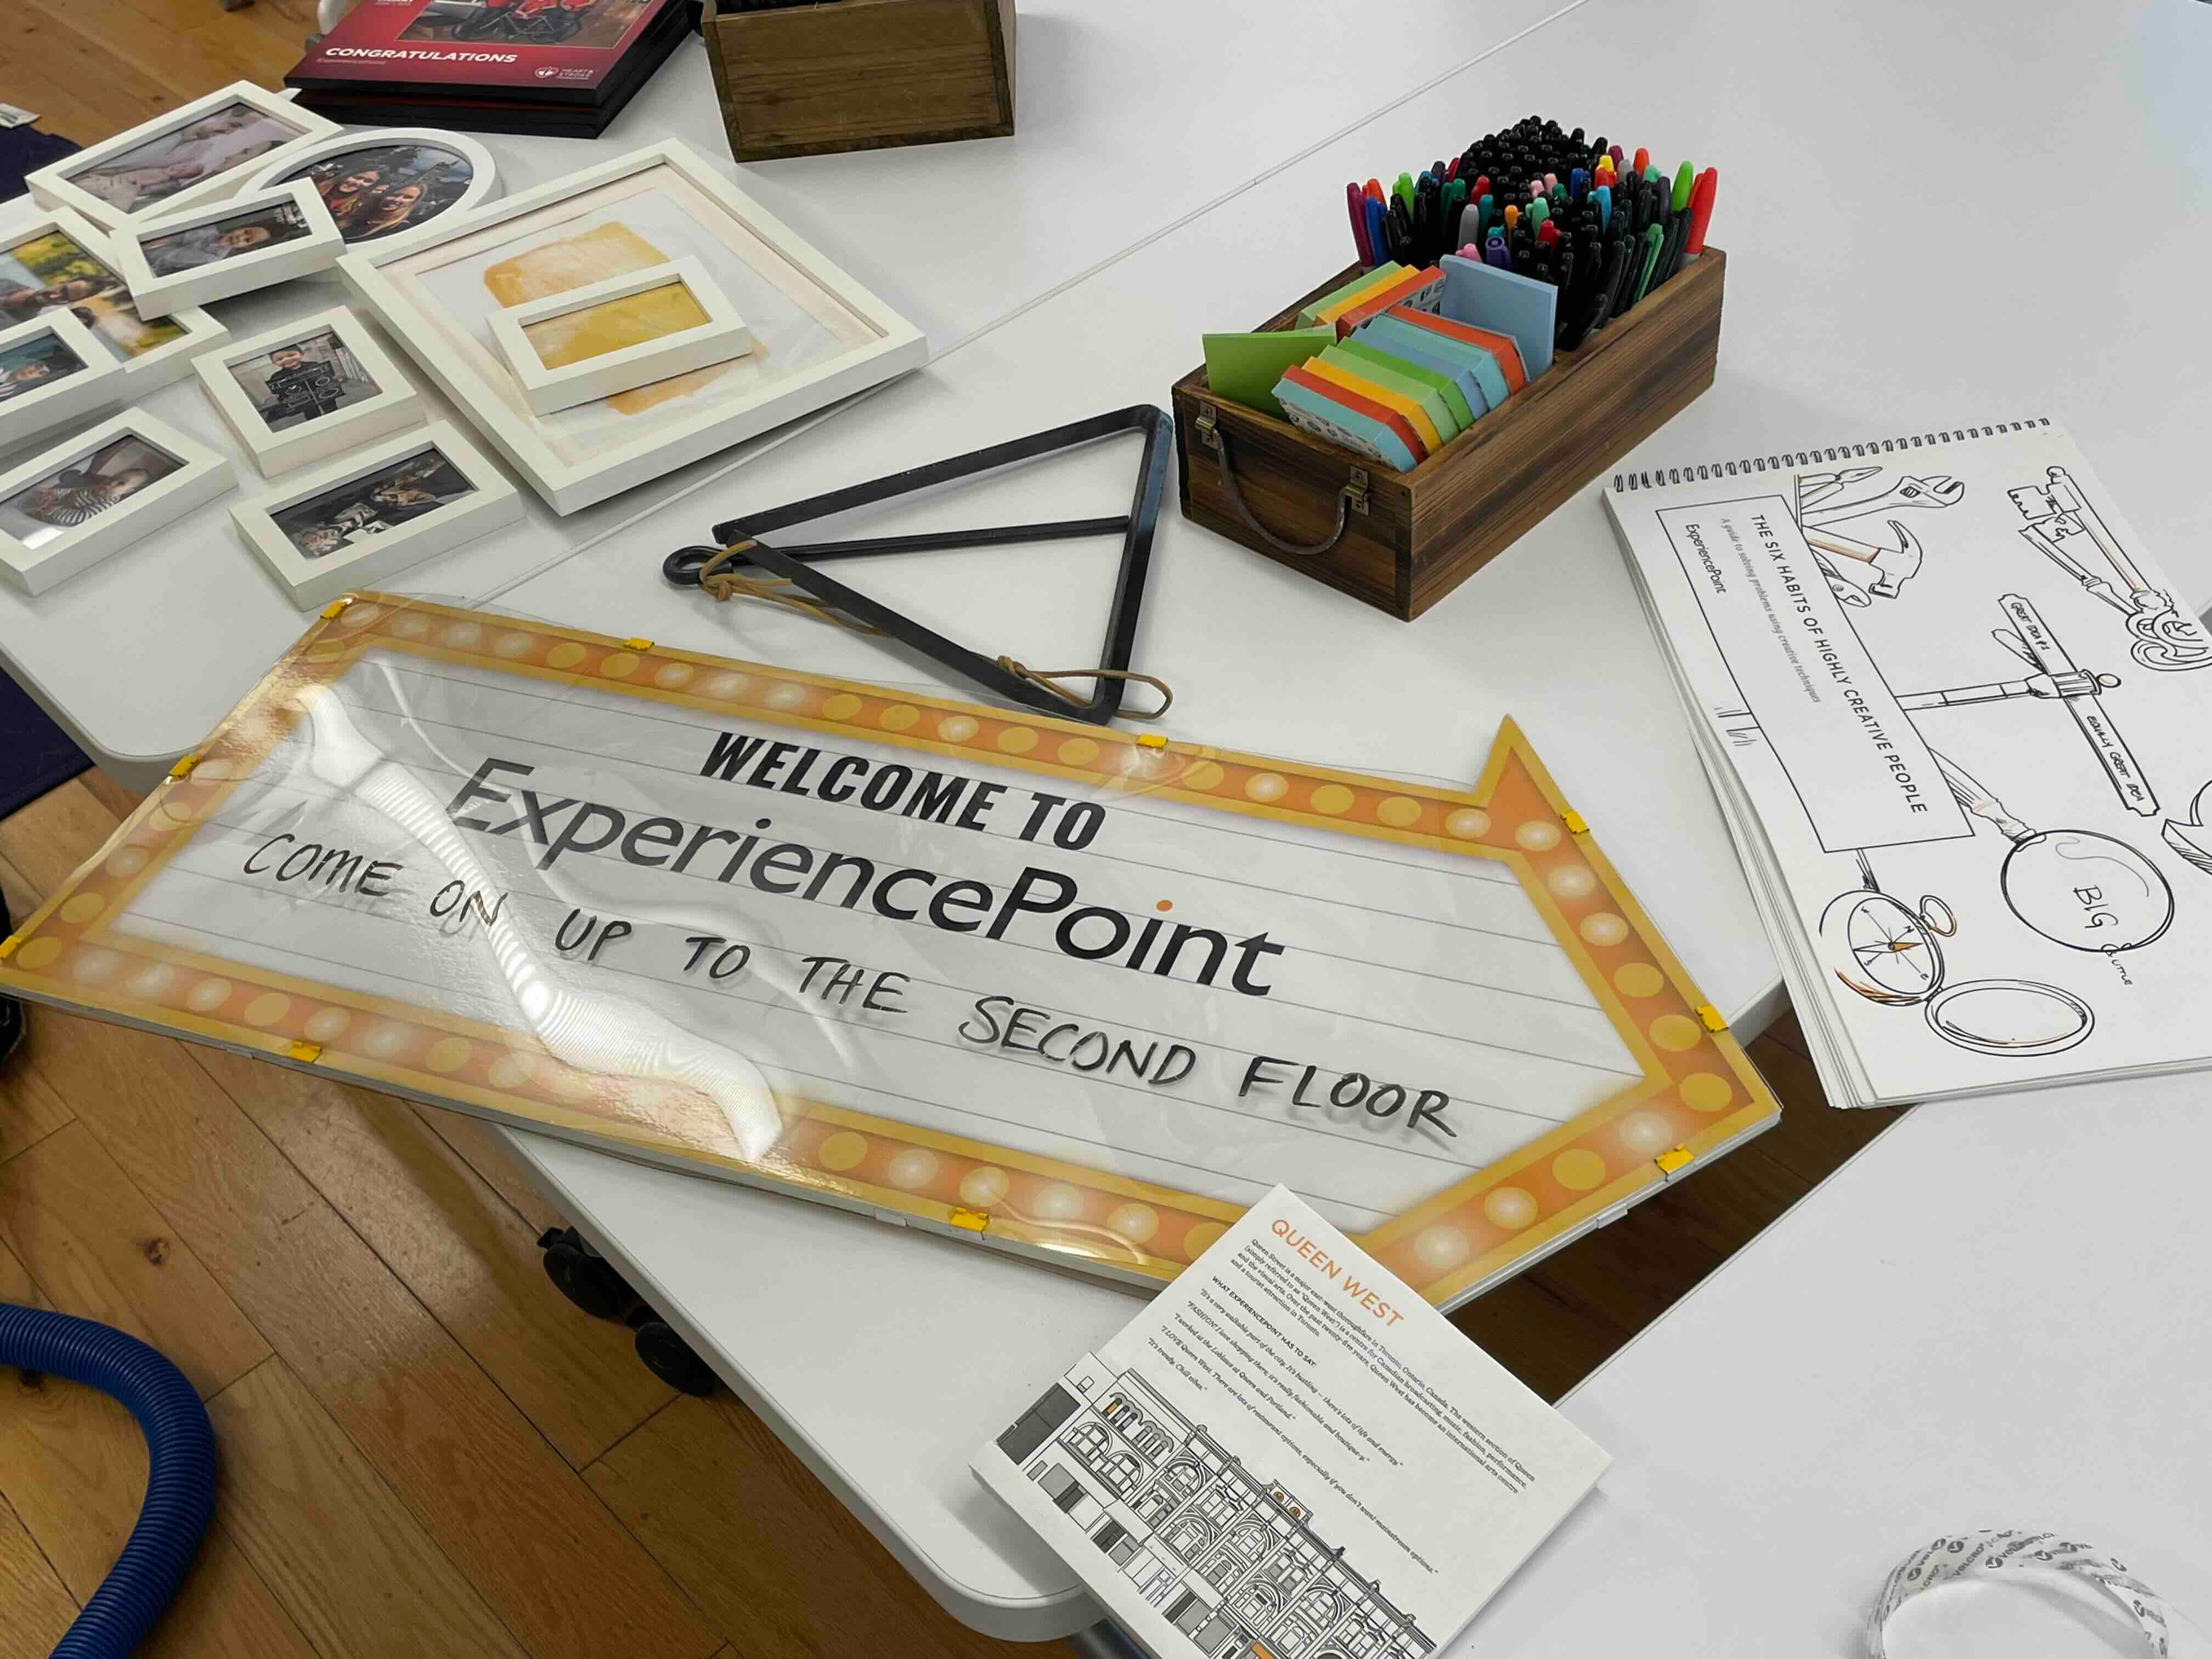 An office sign that says "Welcome to ExperiencePoint!" lies astray on a table as it gets unpacked in a new office space.